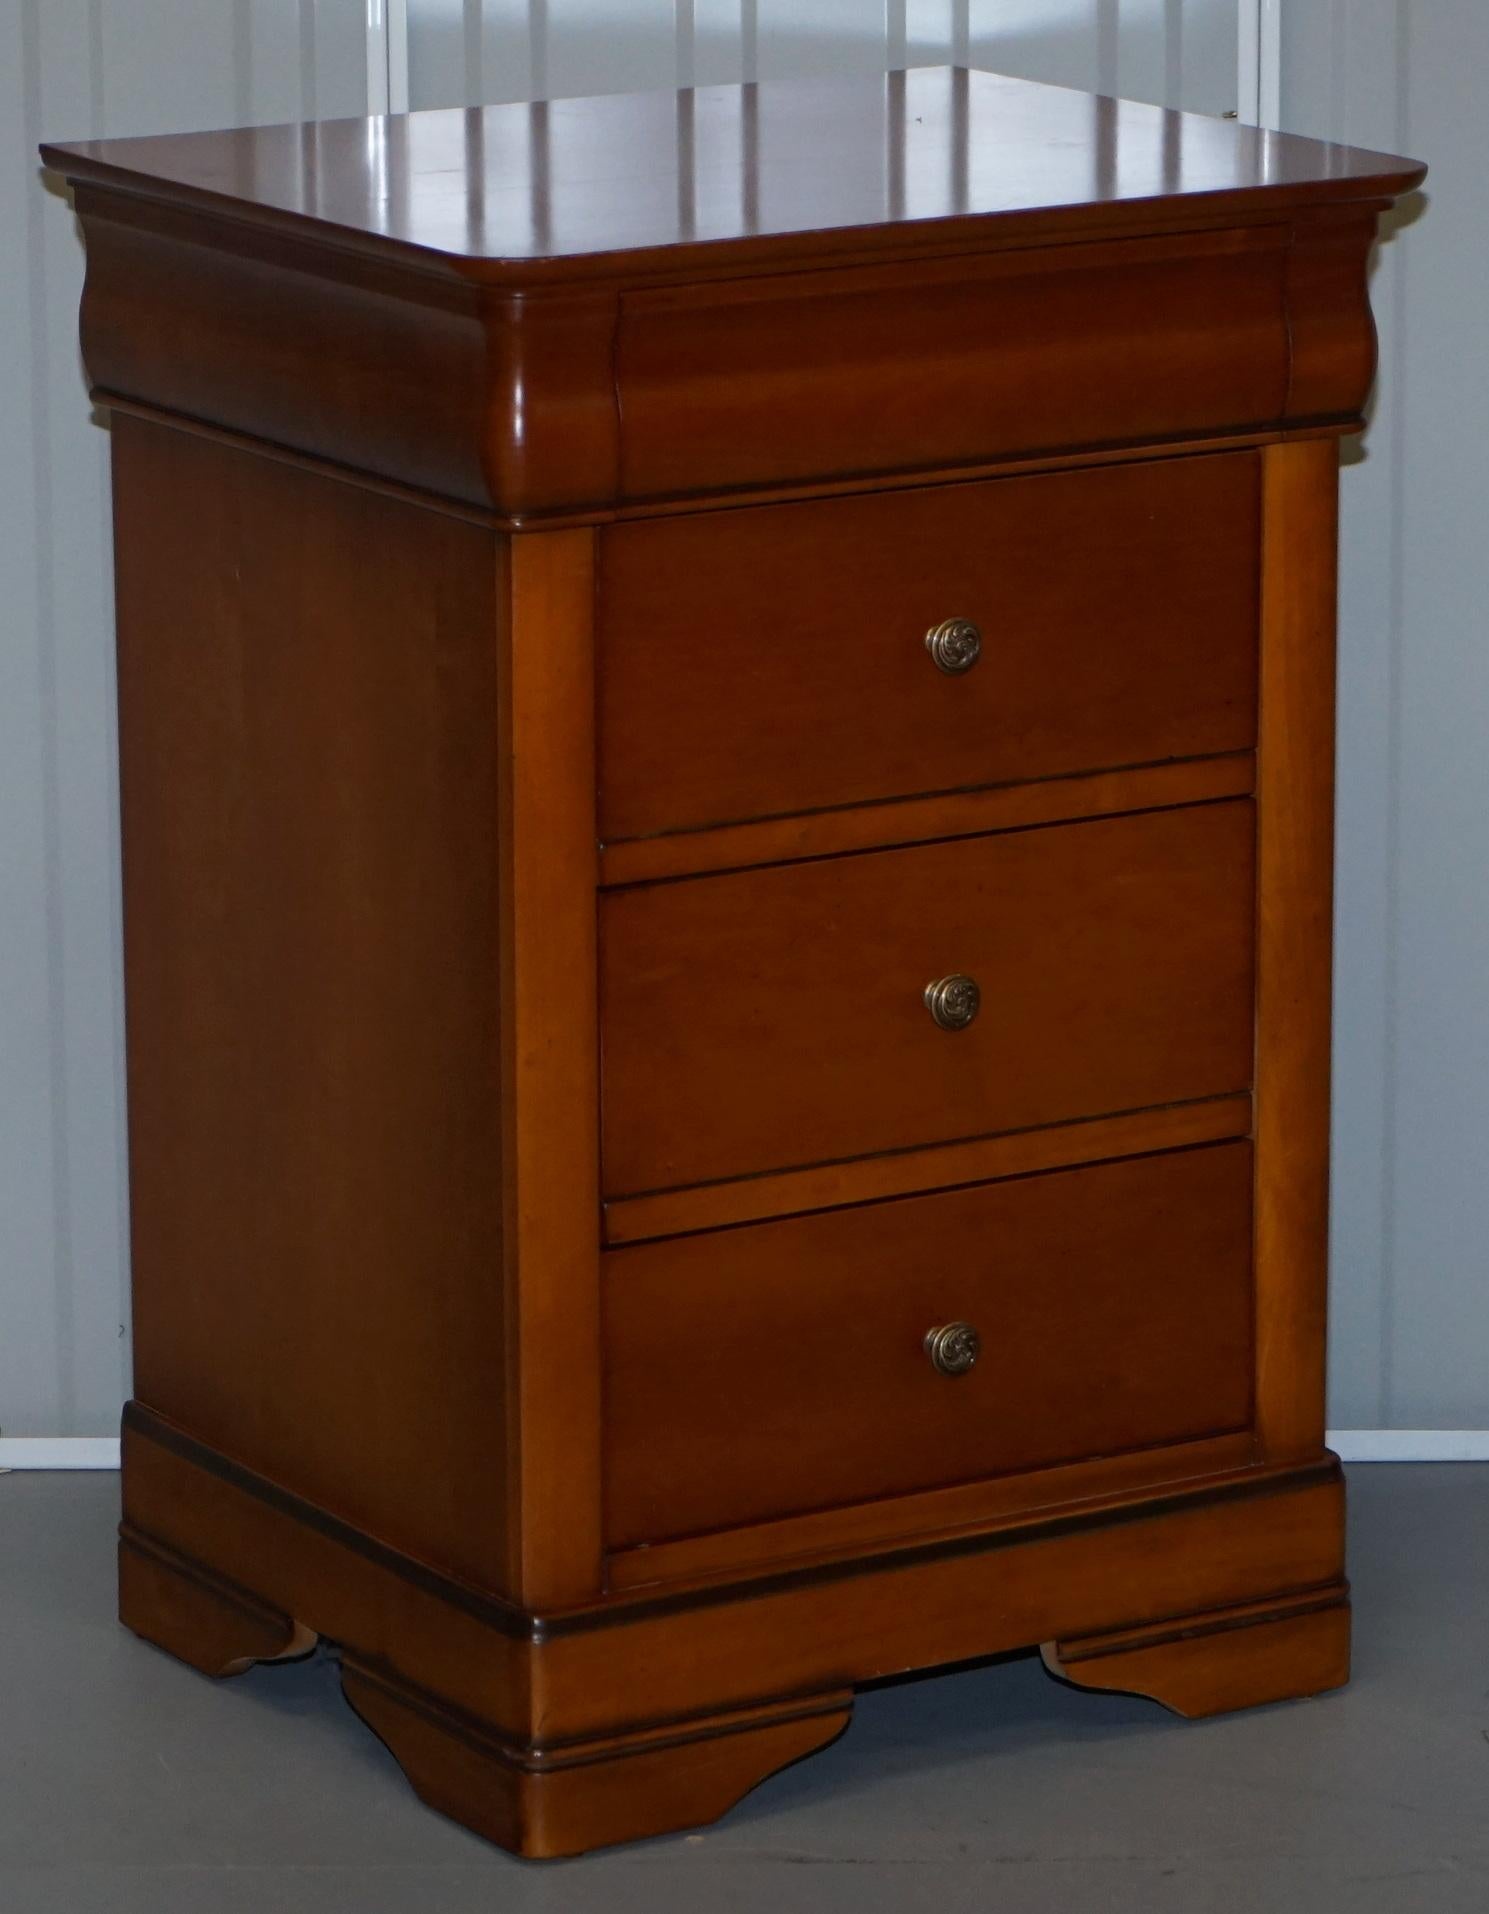 We are delighted to offer for sale this lovely pair of very large bedside table chest of drawers

This are part of a suite, I also have the matching wardrobe and small bedside table

These are very large for bedside tables, they have four